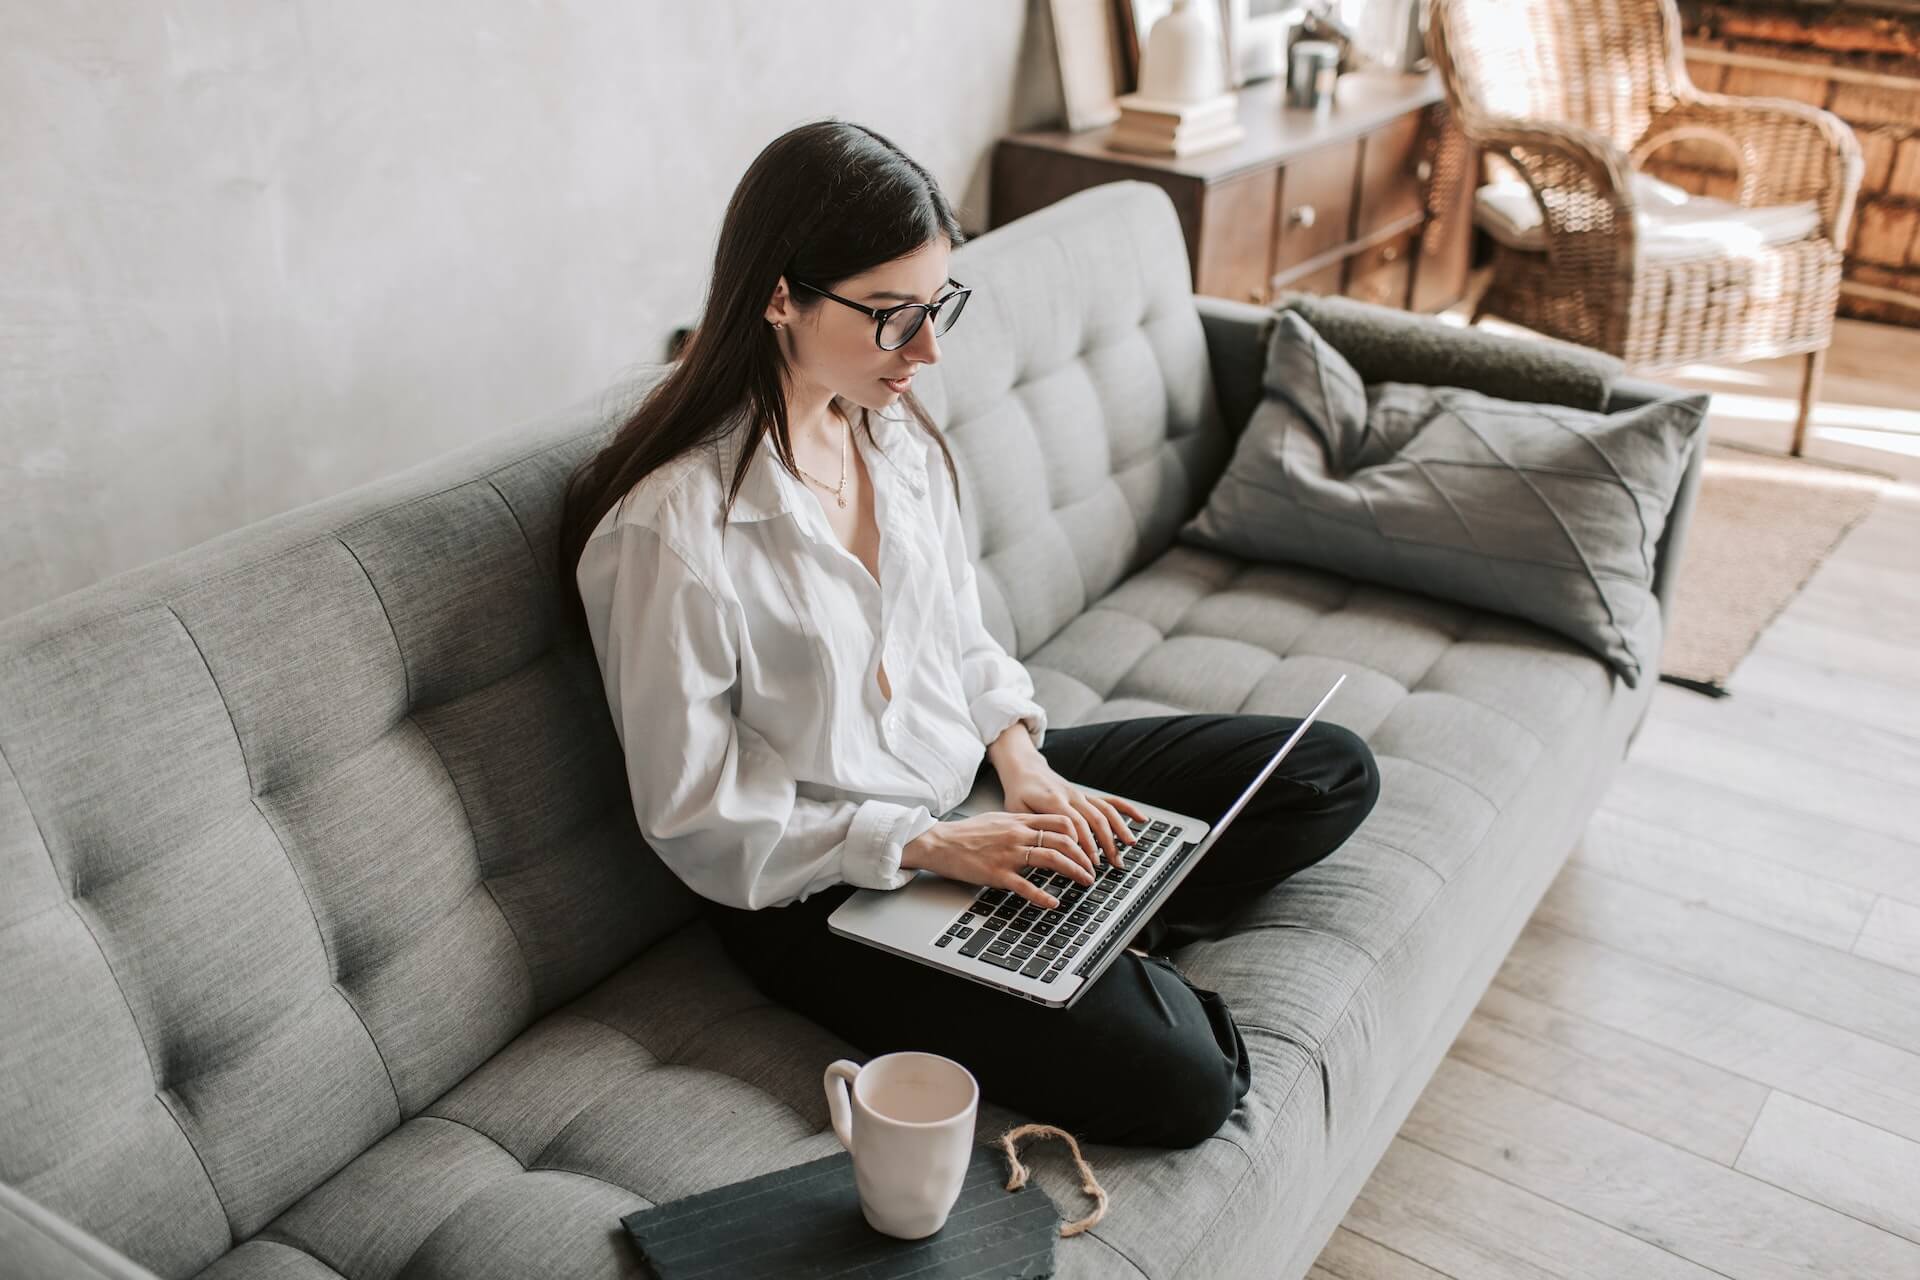 Woman working on her laptop while sitting on a couch